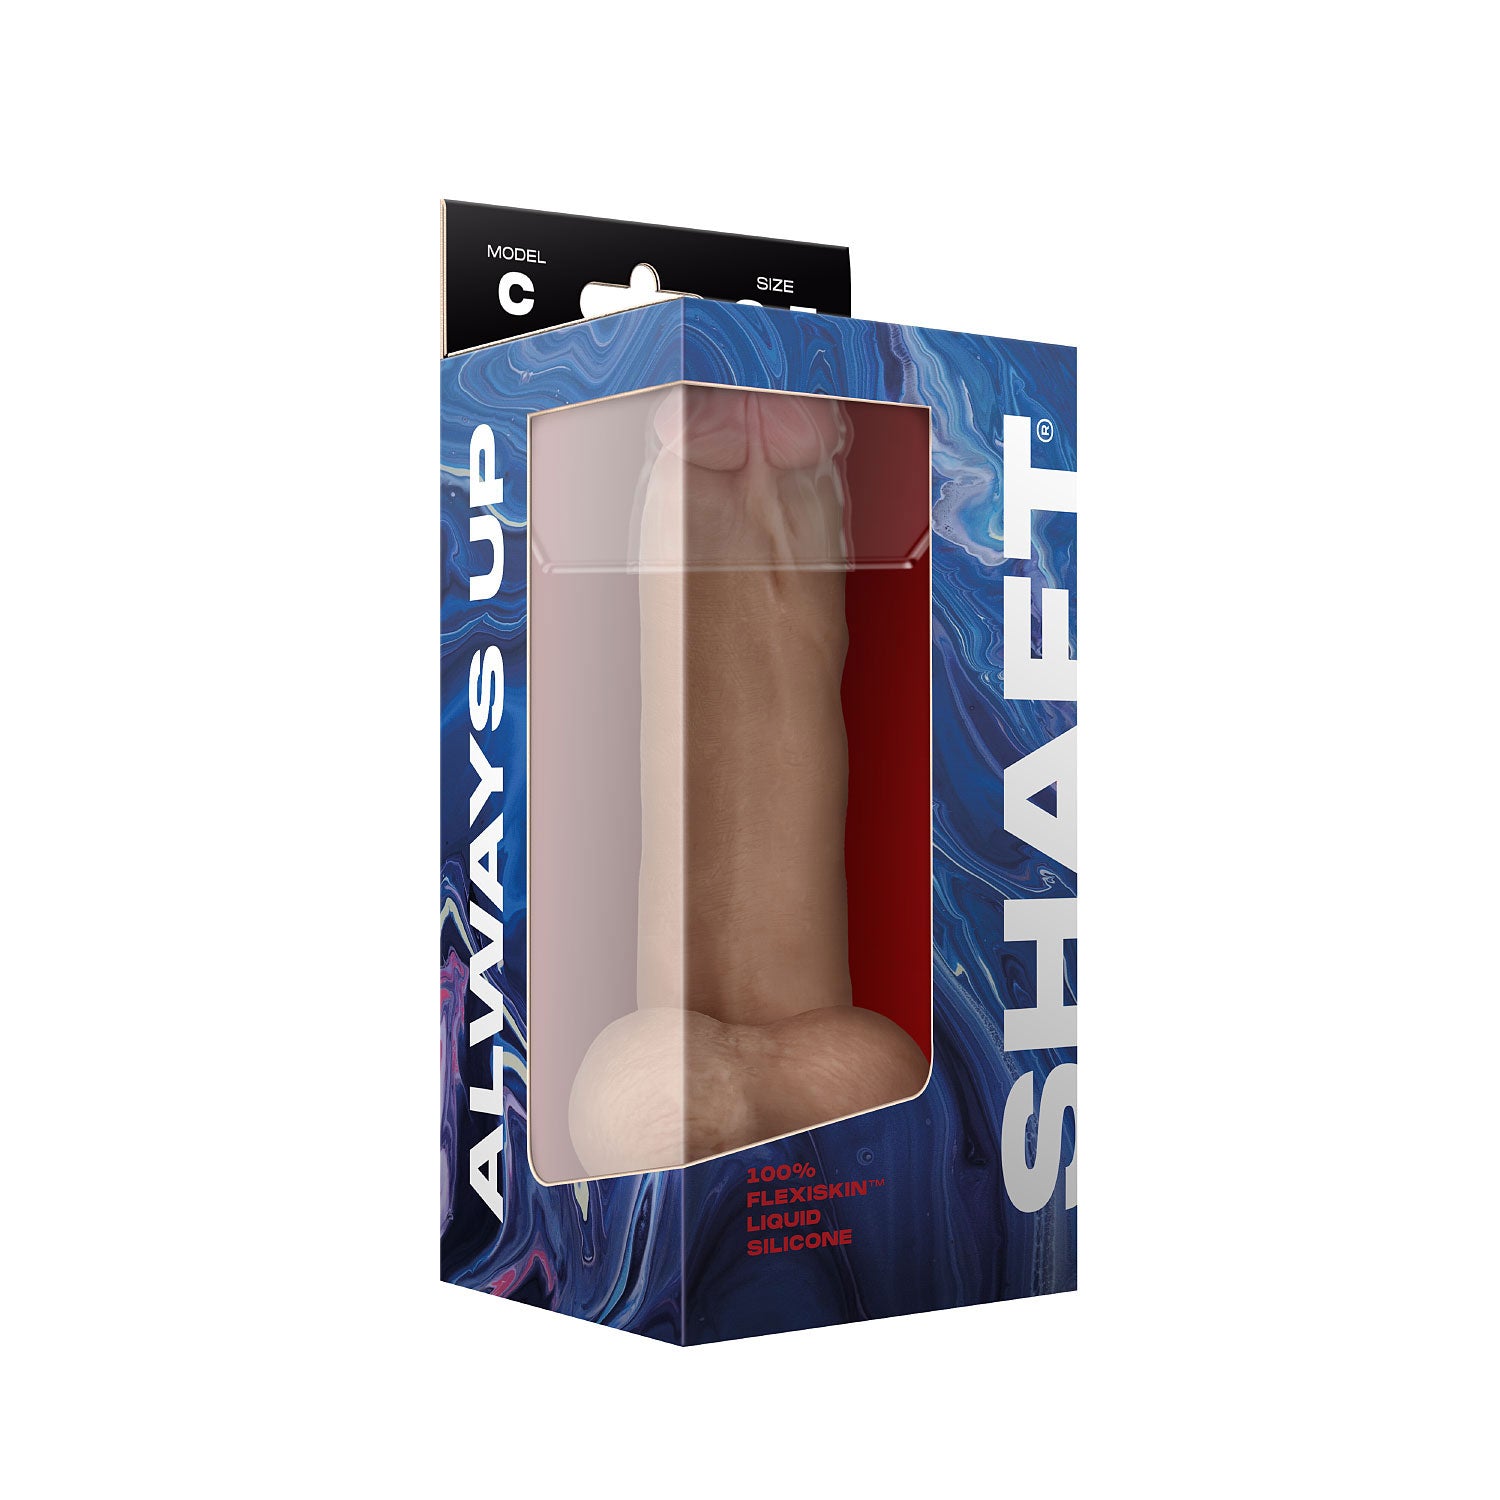 Shaft - Model C 8.5 Inch Liquid Silicone Dong With Balls - Pine-1